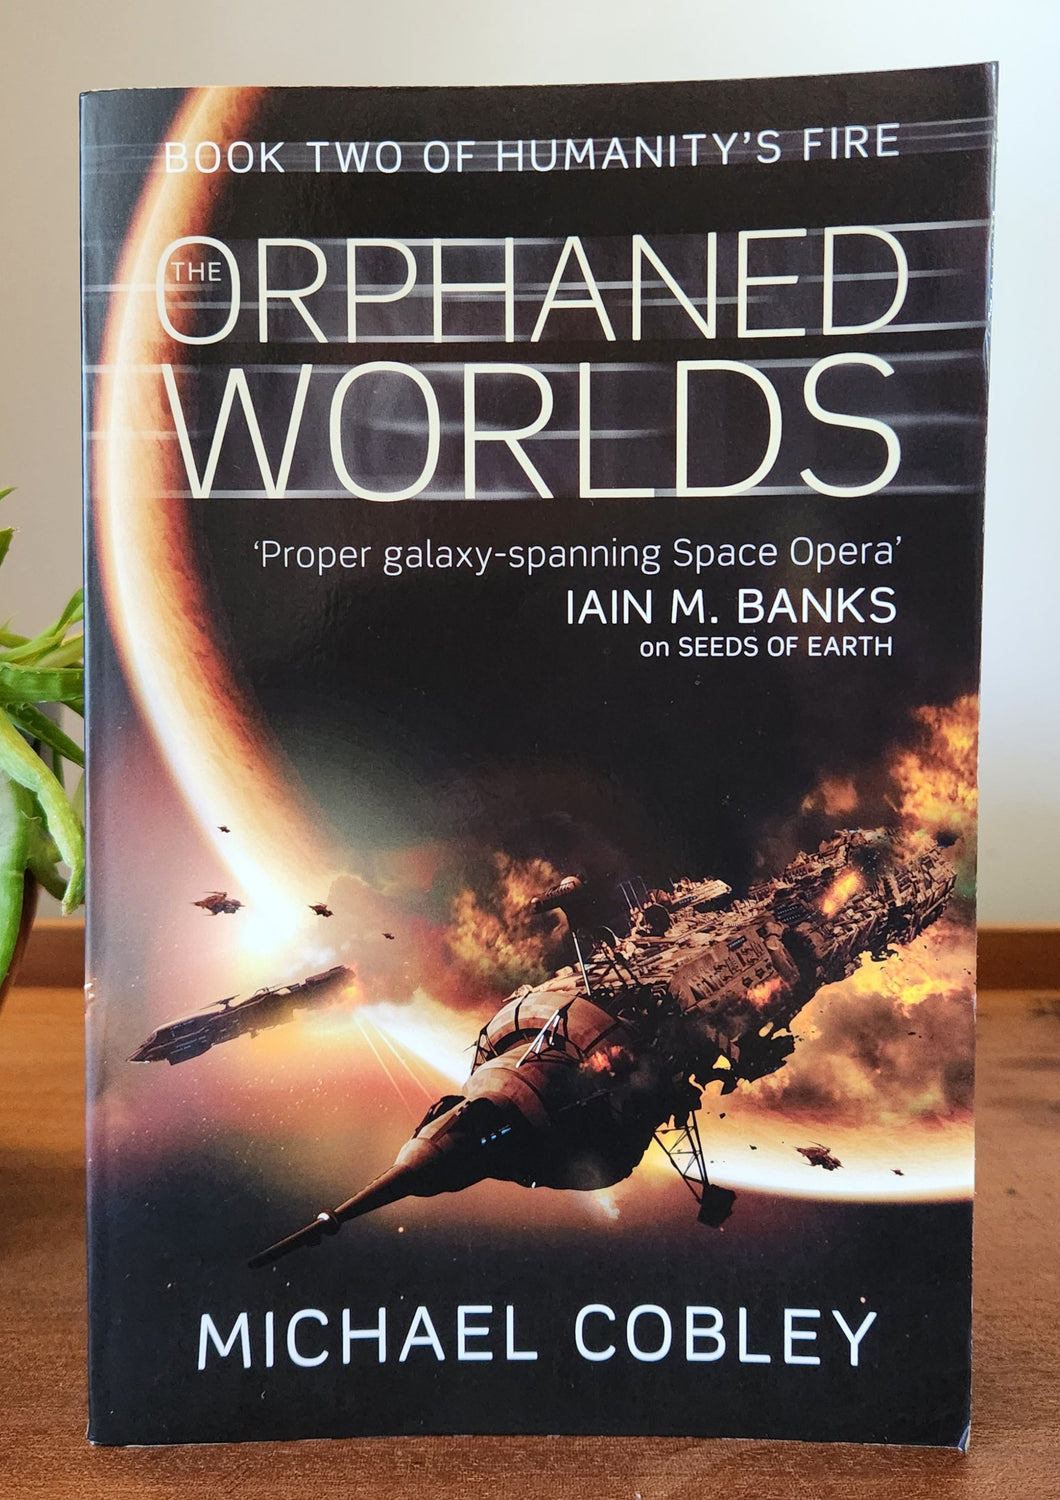 The Orphaned Worlds by Michael Cobley